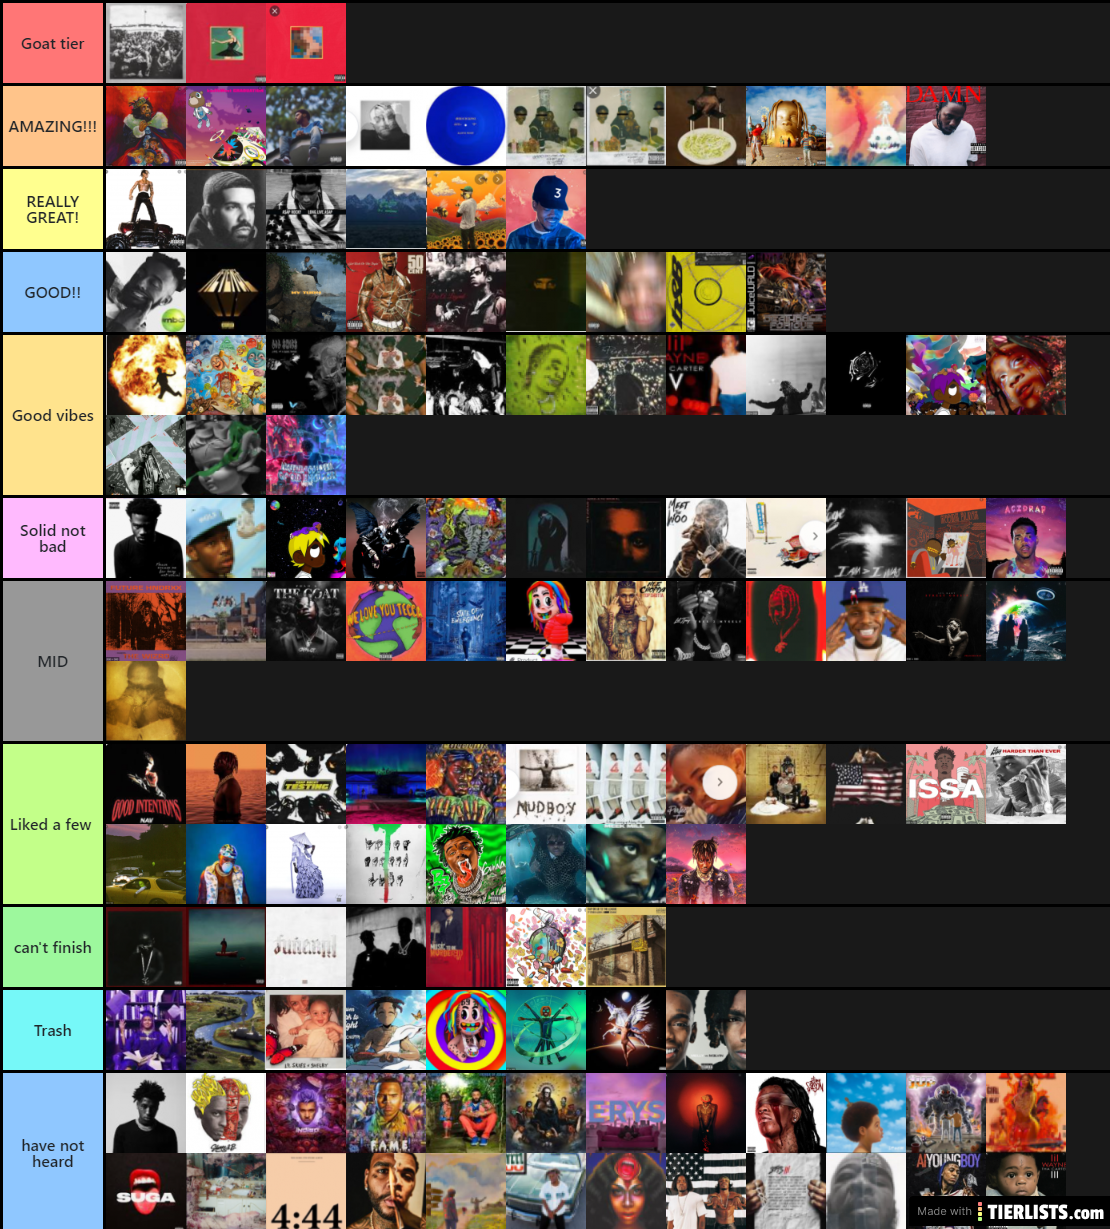 ALBUMS (MY OPINION)